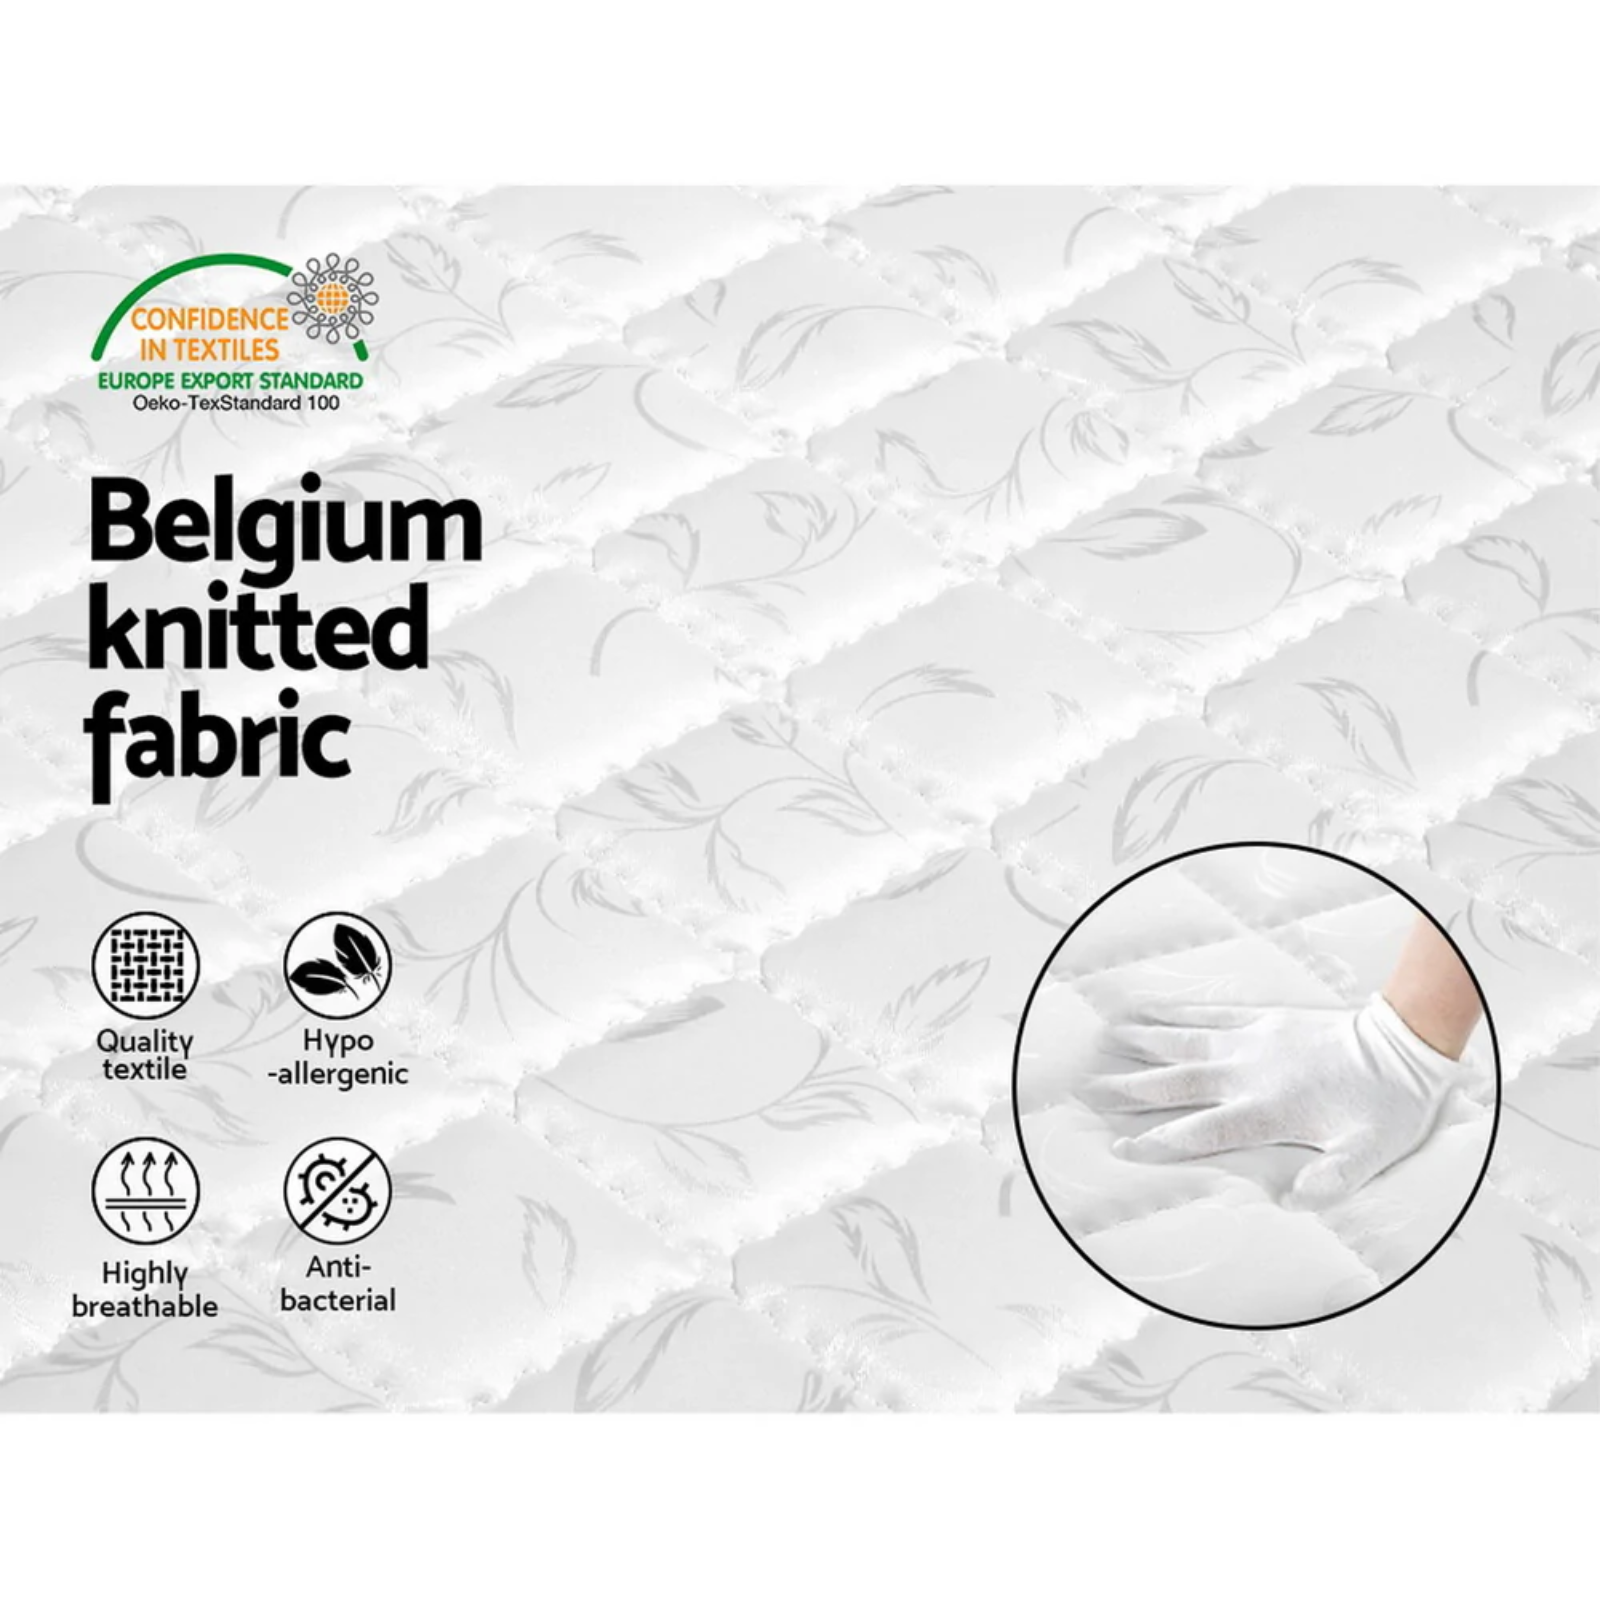 Giselle Bedding Alzbeta Spring Mattress features Belgium knitted fabric, quality textile, hypoallergenic, highly breathable